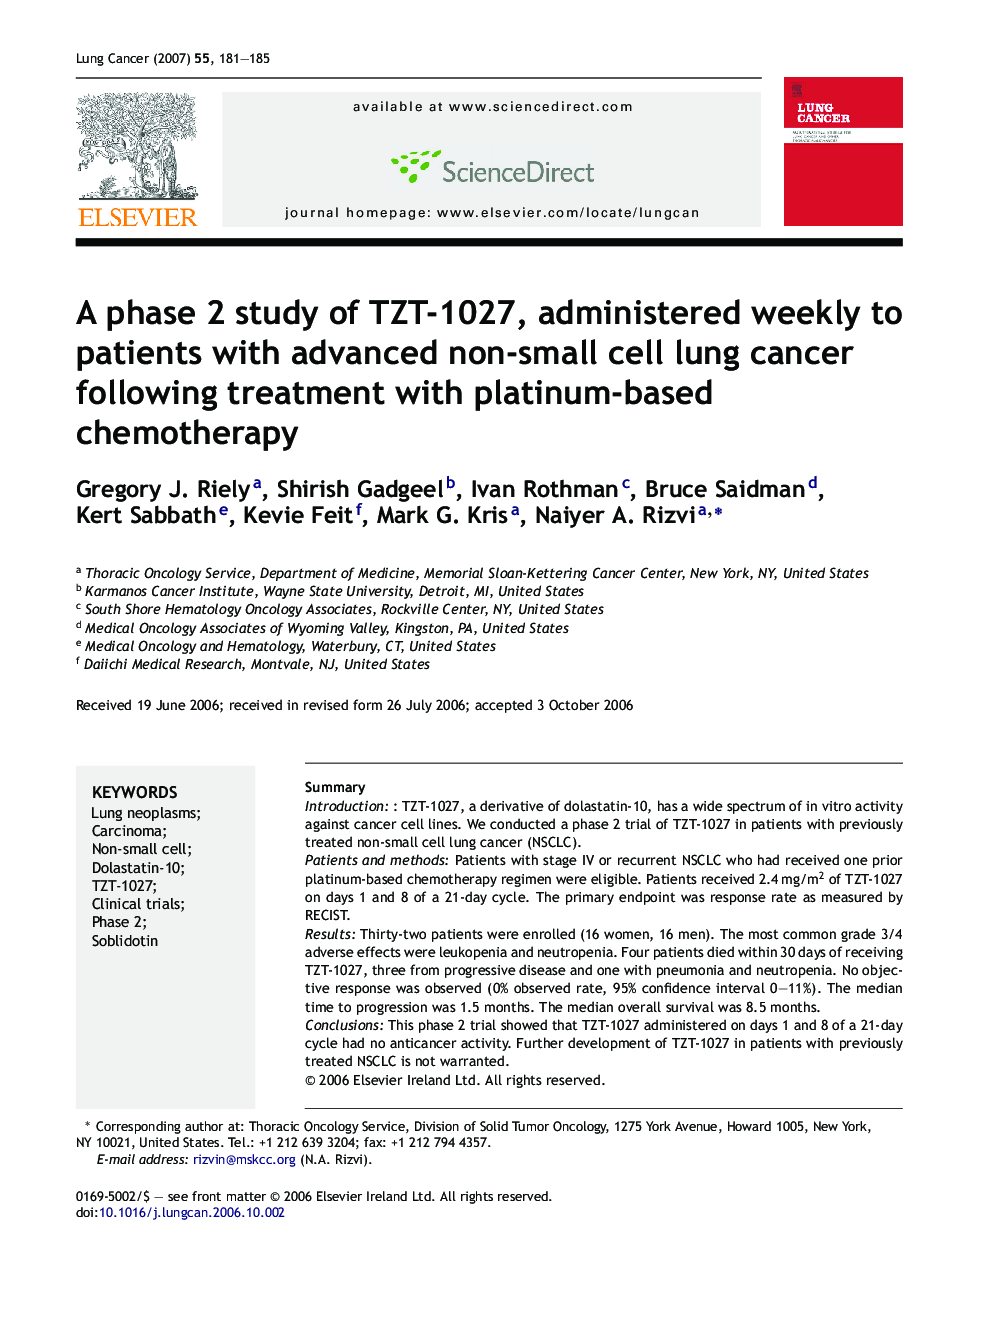 A phase 2 study of TZT-1027, administered weekly to patients with advanced non-small cell lung cancer following treatment with platinum-based chemotherapy